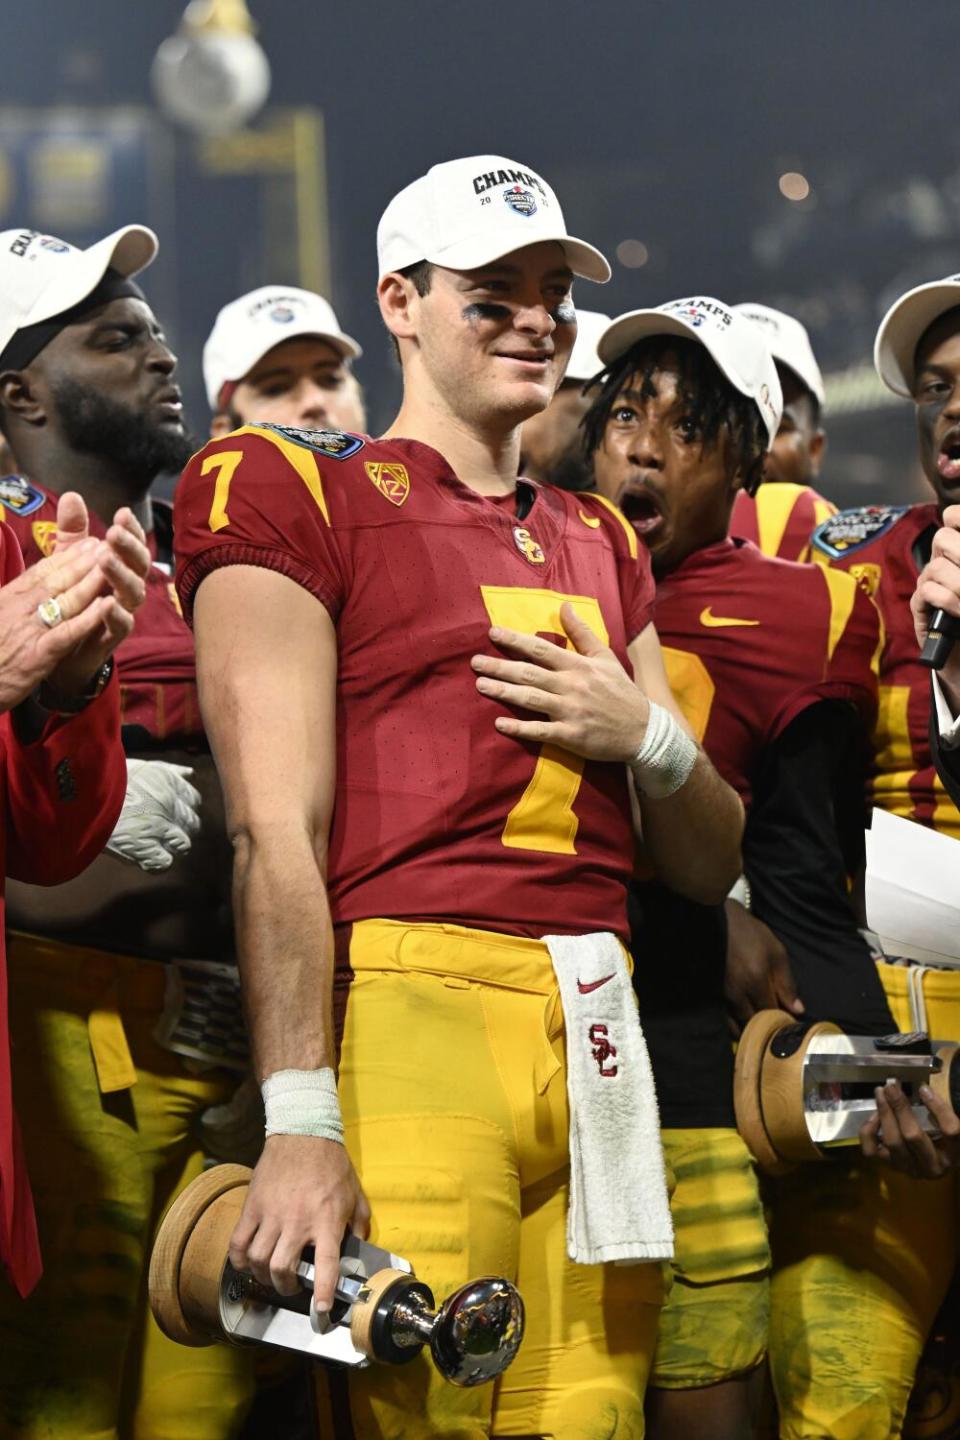 USC quarterback Miller Moss holds the offensive player of the game trophy after the team's win in the Holiday Bowl.